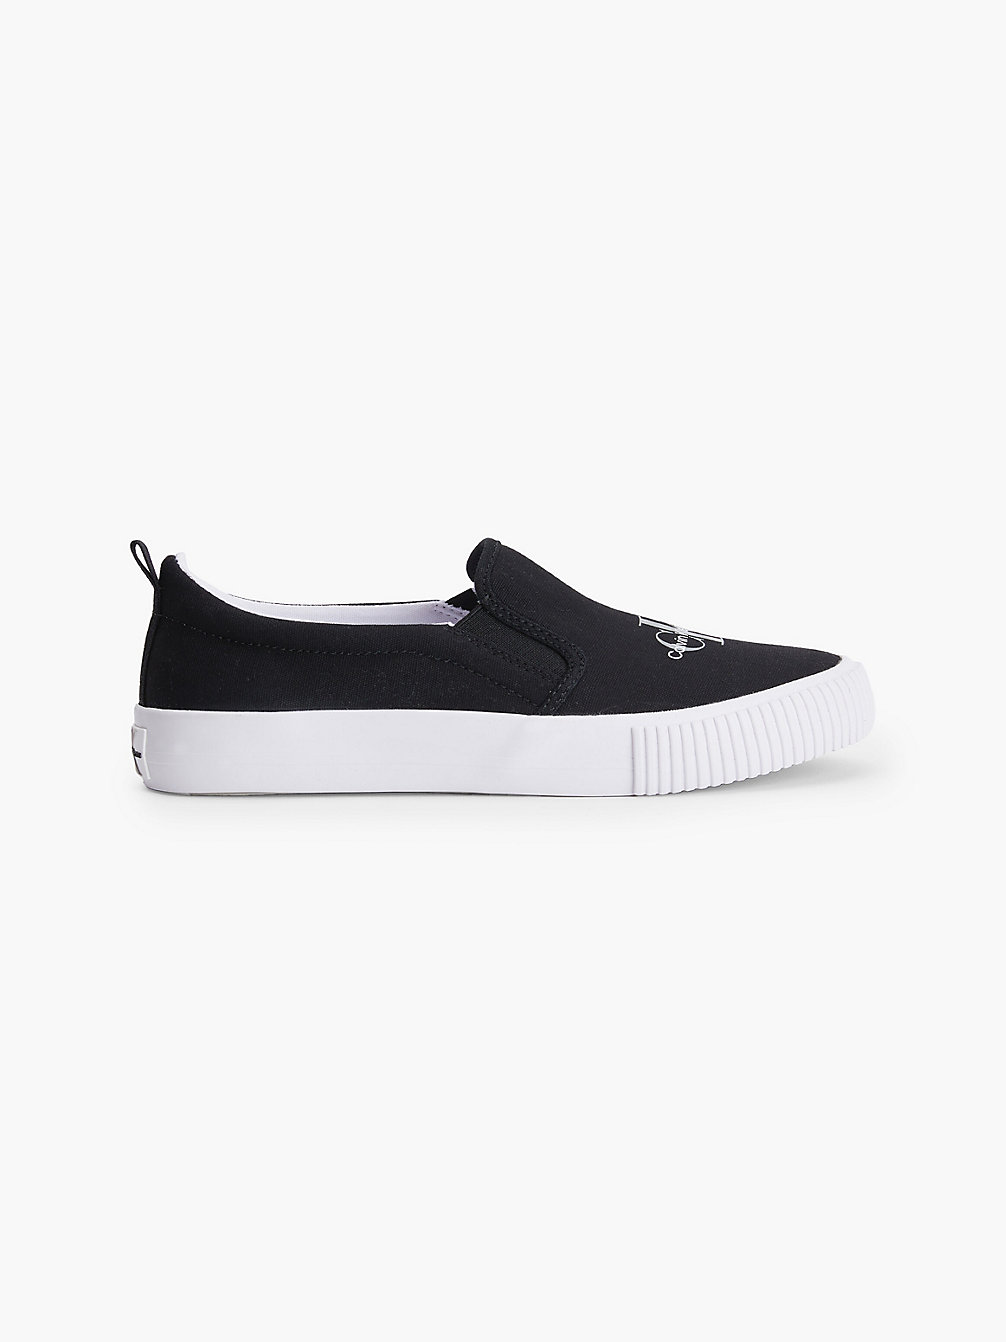 BLACK Recycled Canvas Trainers undefined kids unisex Calvin Klein